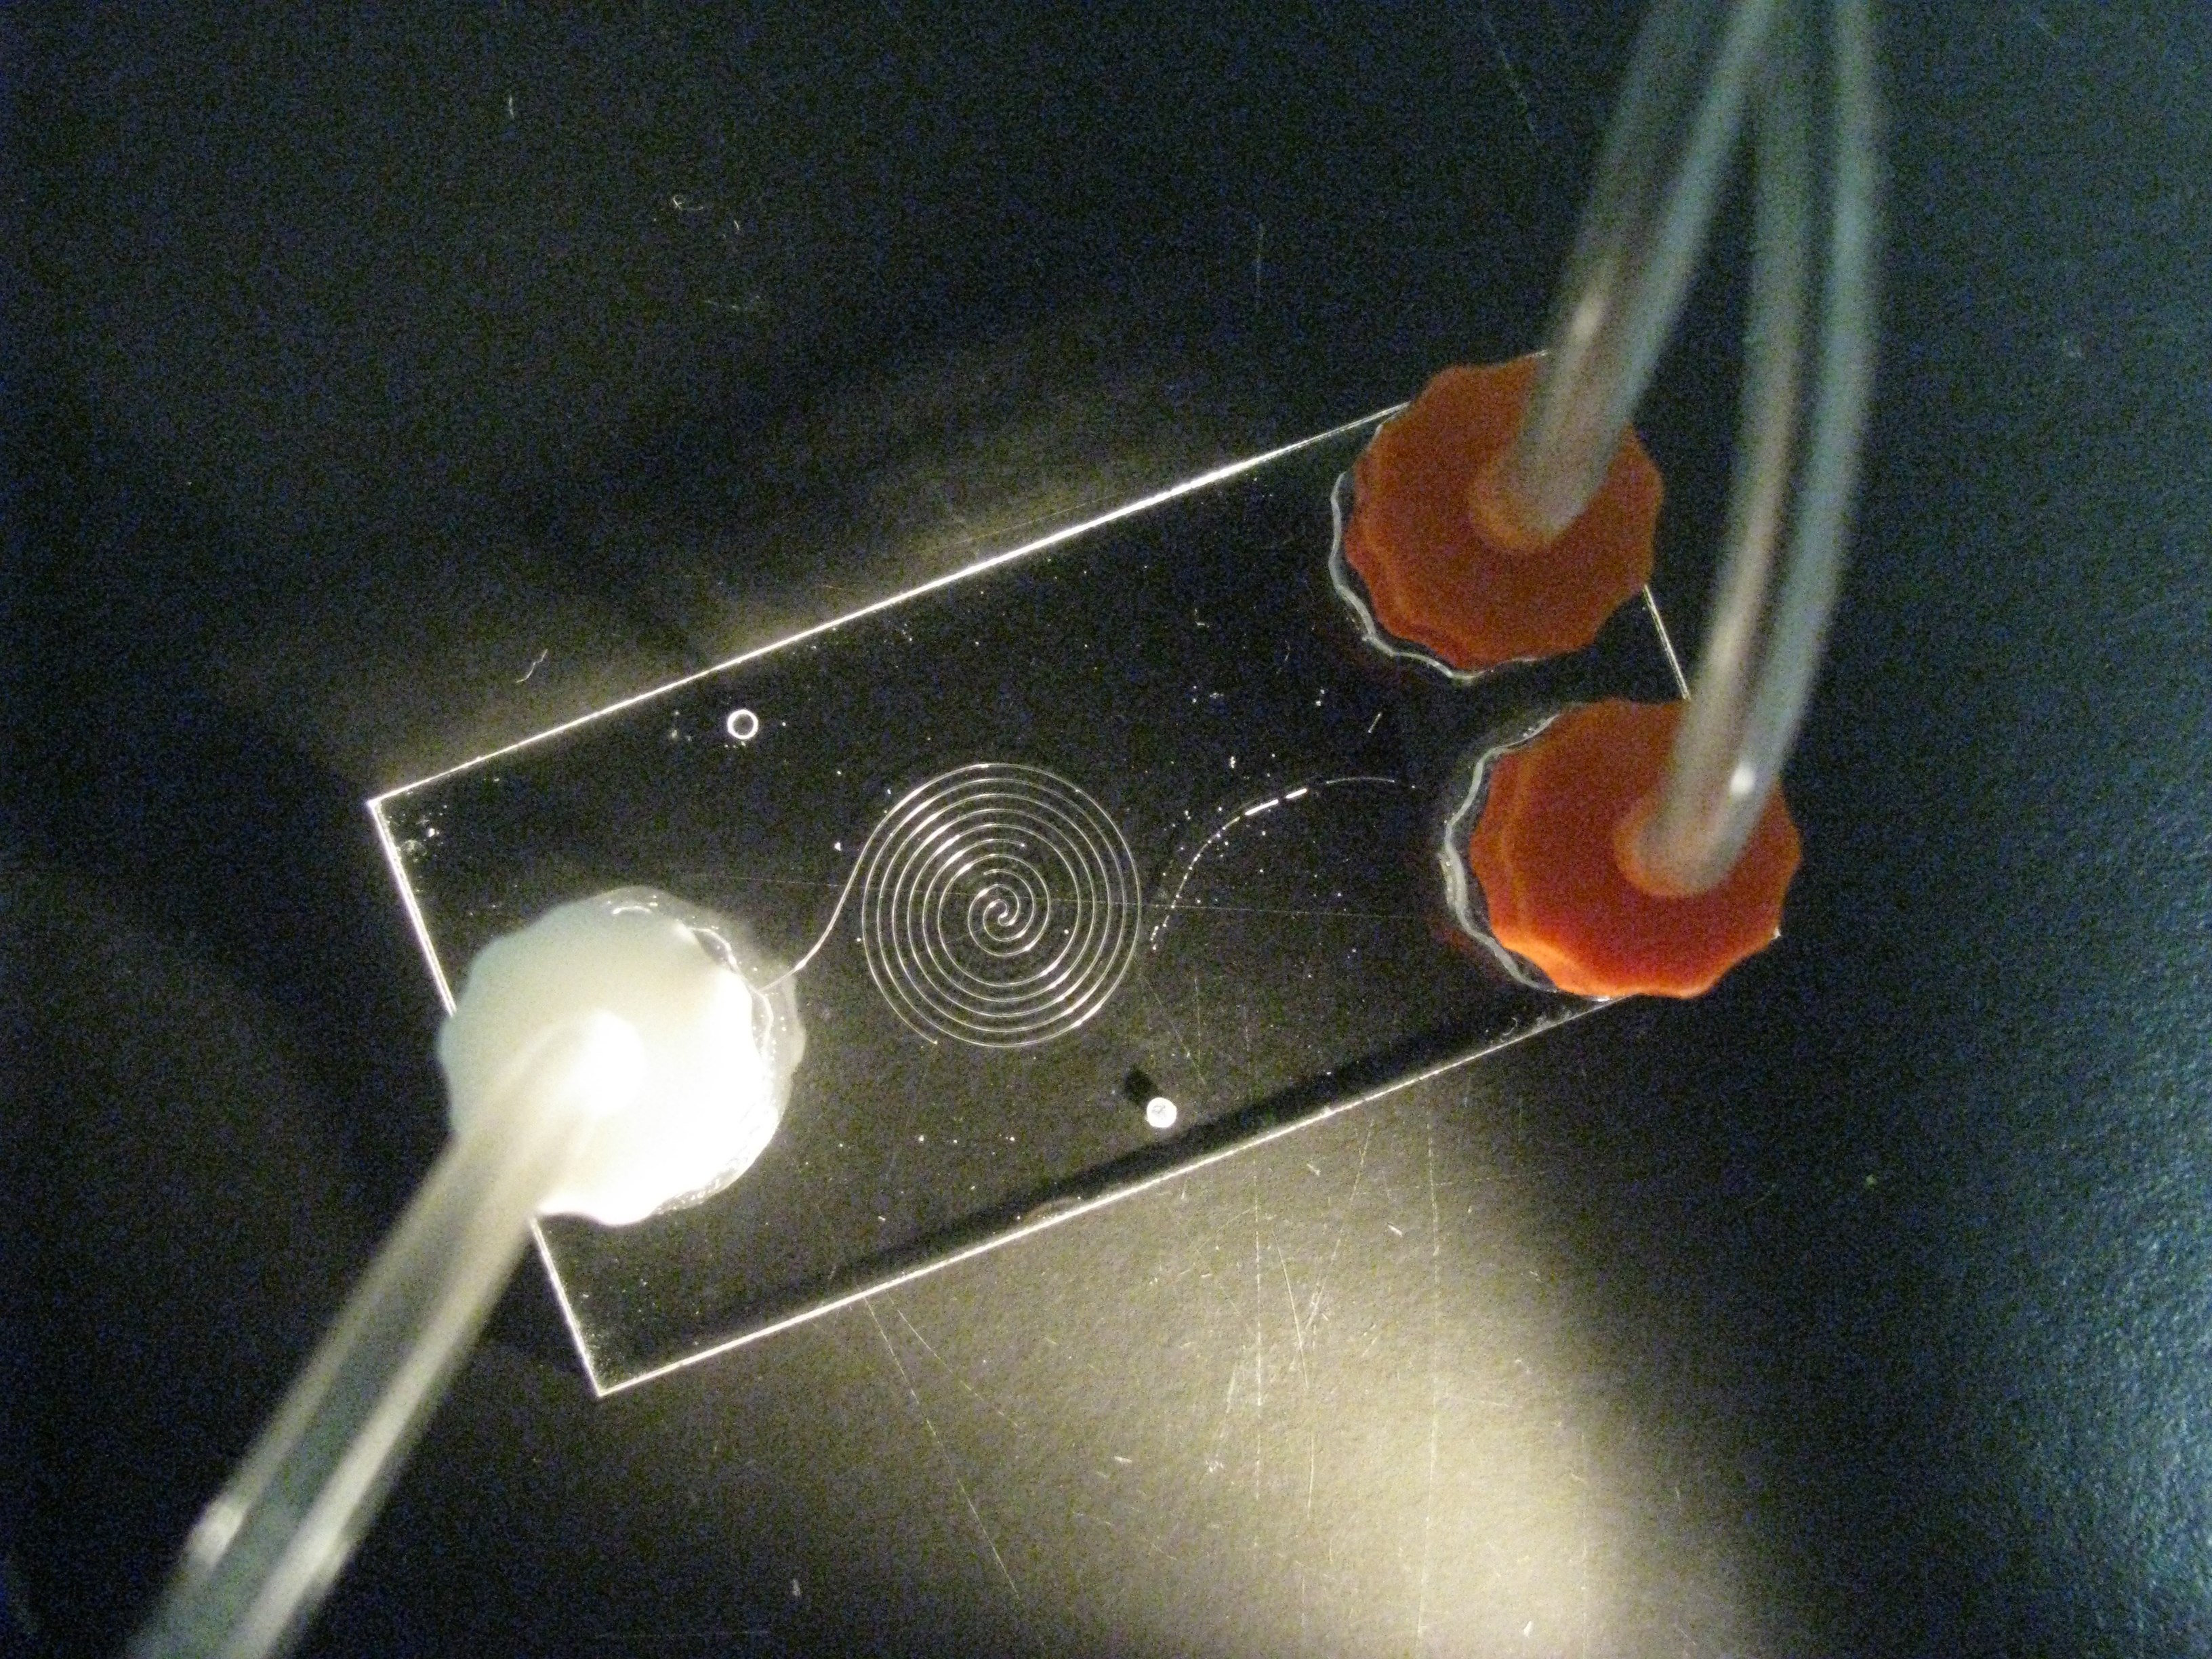 A microfluidic chip with a deep spiral-shaped channel